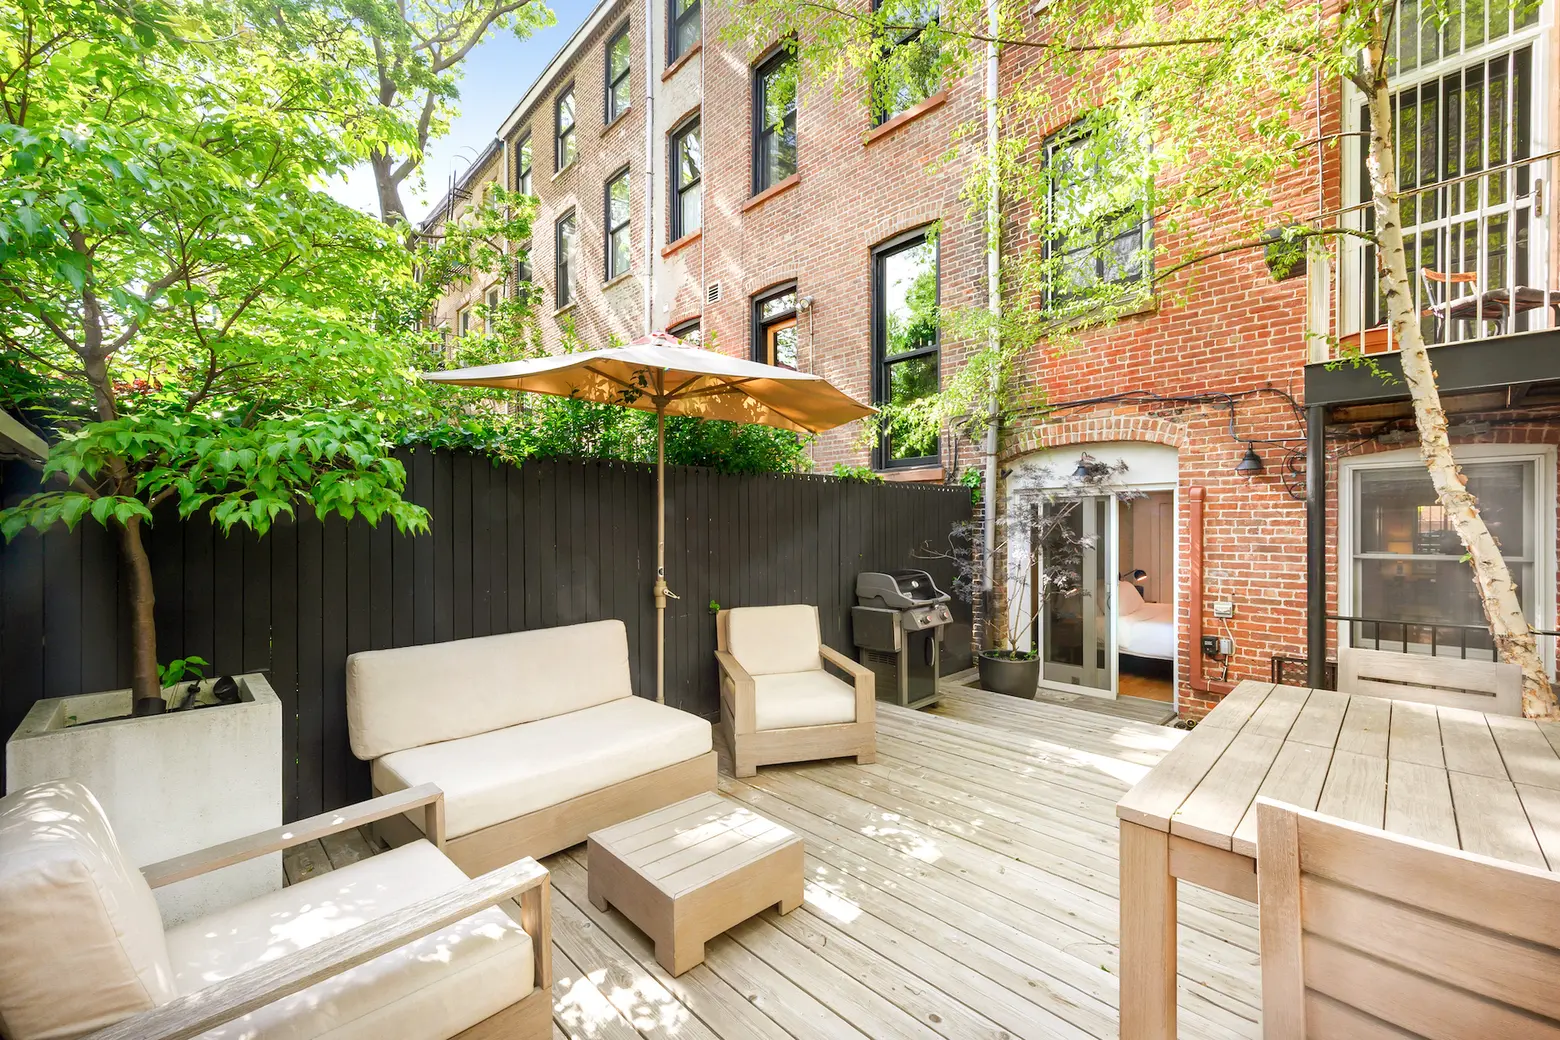 An outdoor deck and bonus basement make this $1.6M Fort Greene co-op a stand-out